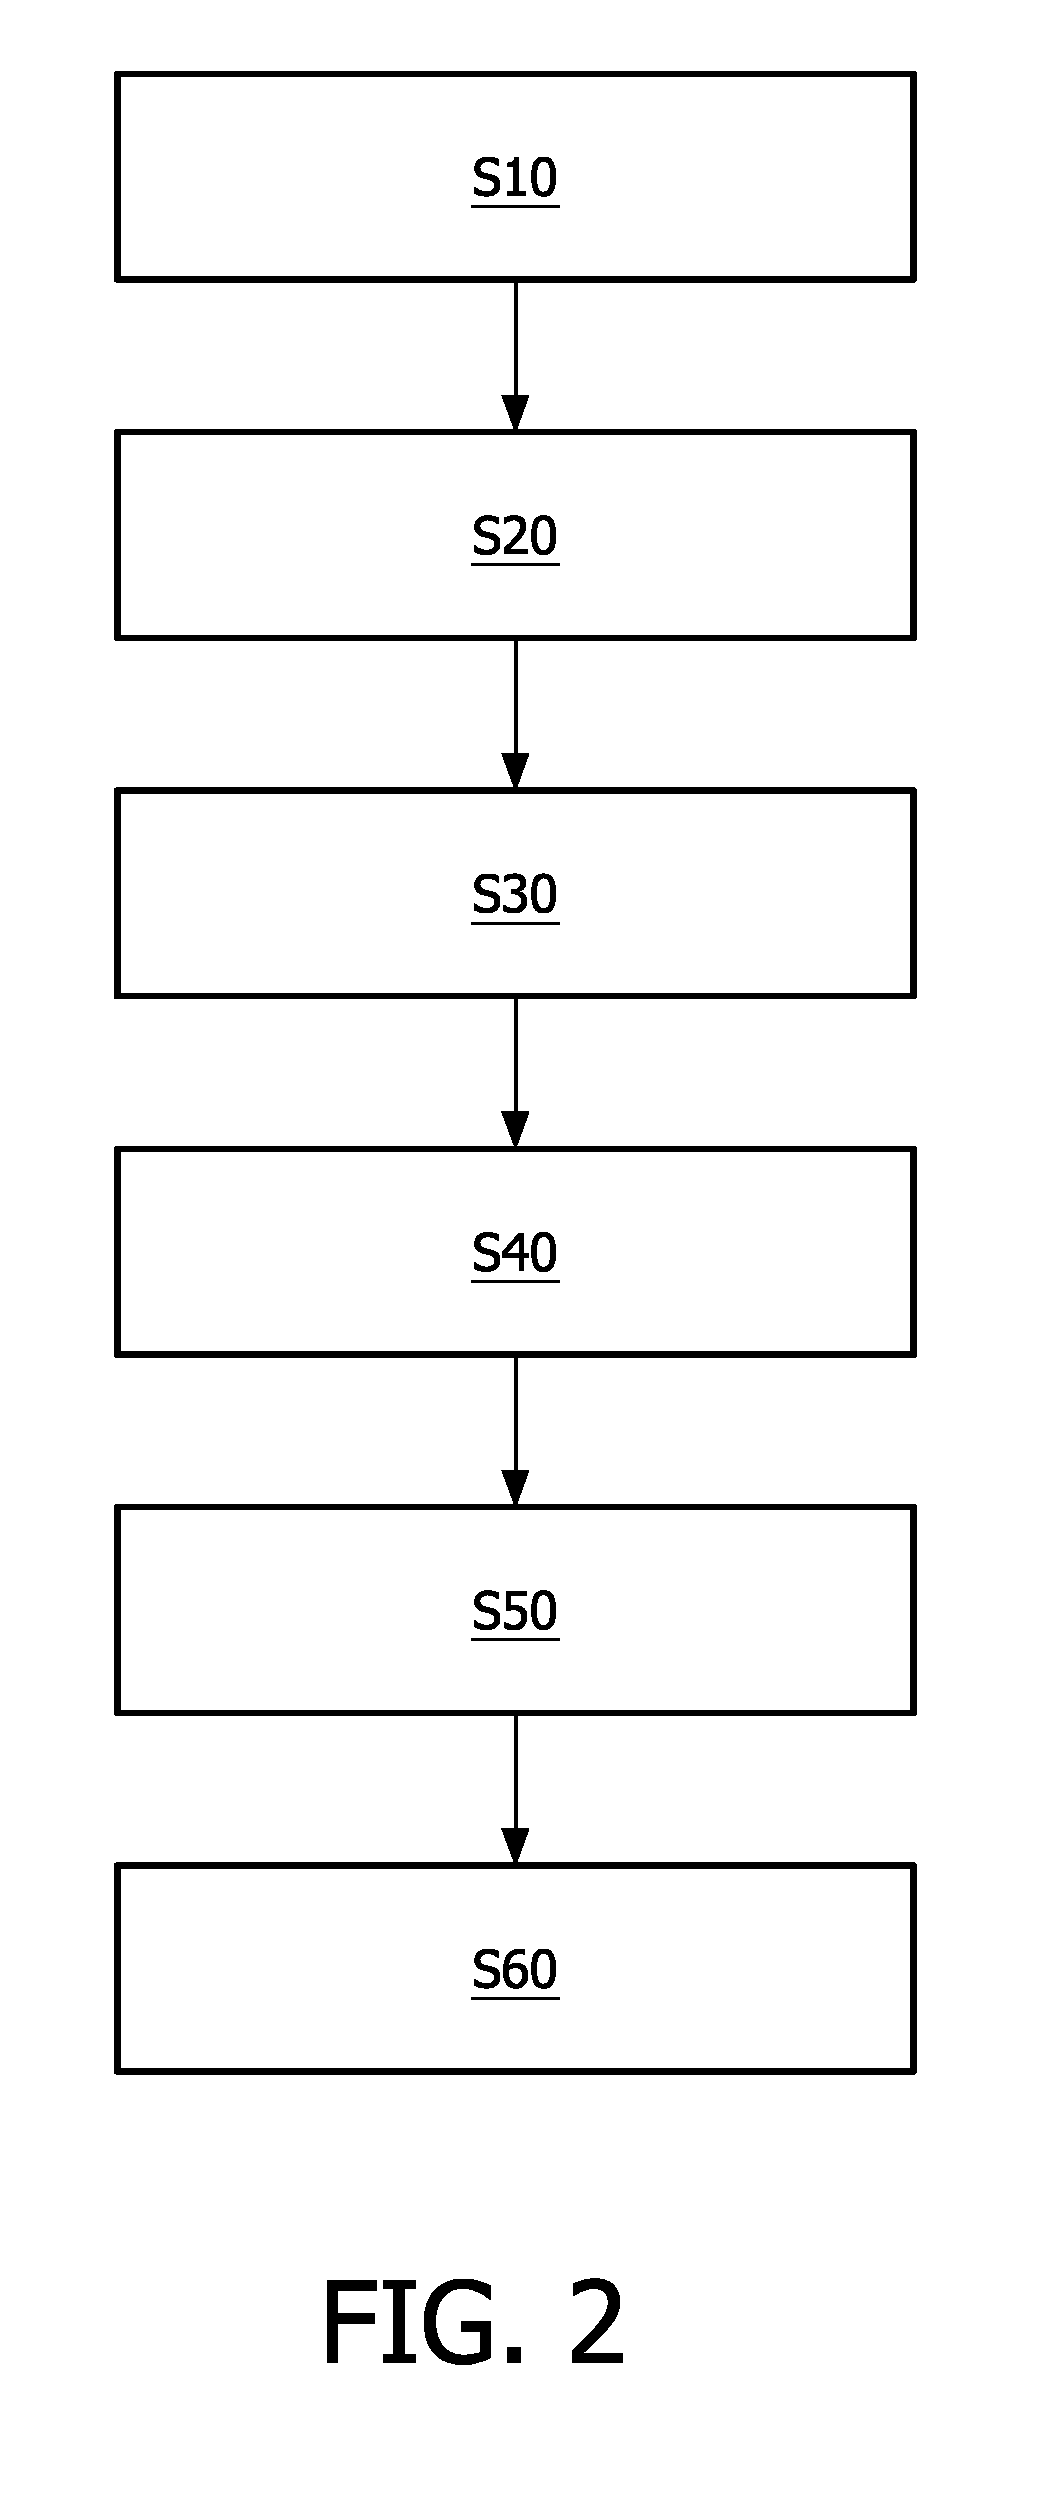 Apparatus and method for indicating likely computer-detected false positives in medical imaging data